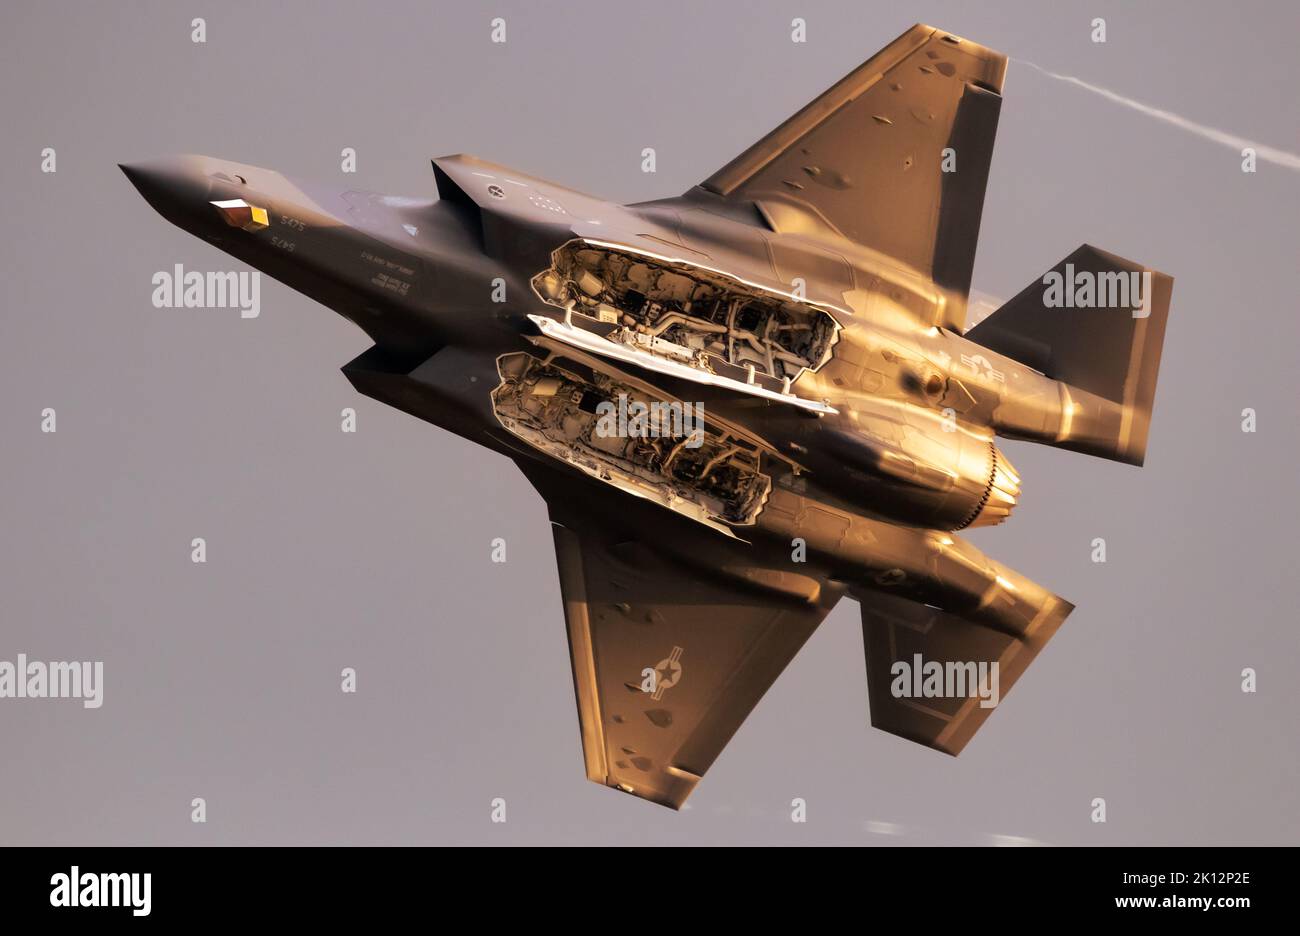 US Air Force Lockheed Martin F-35 Lightning II stealth multirole combat aircraft with open bomb bays flying during the Sanicole Evening Air Show. Belg Stock Photo